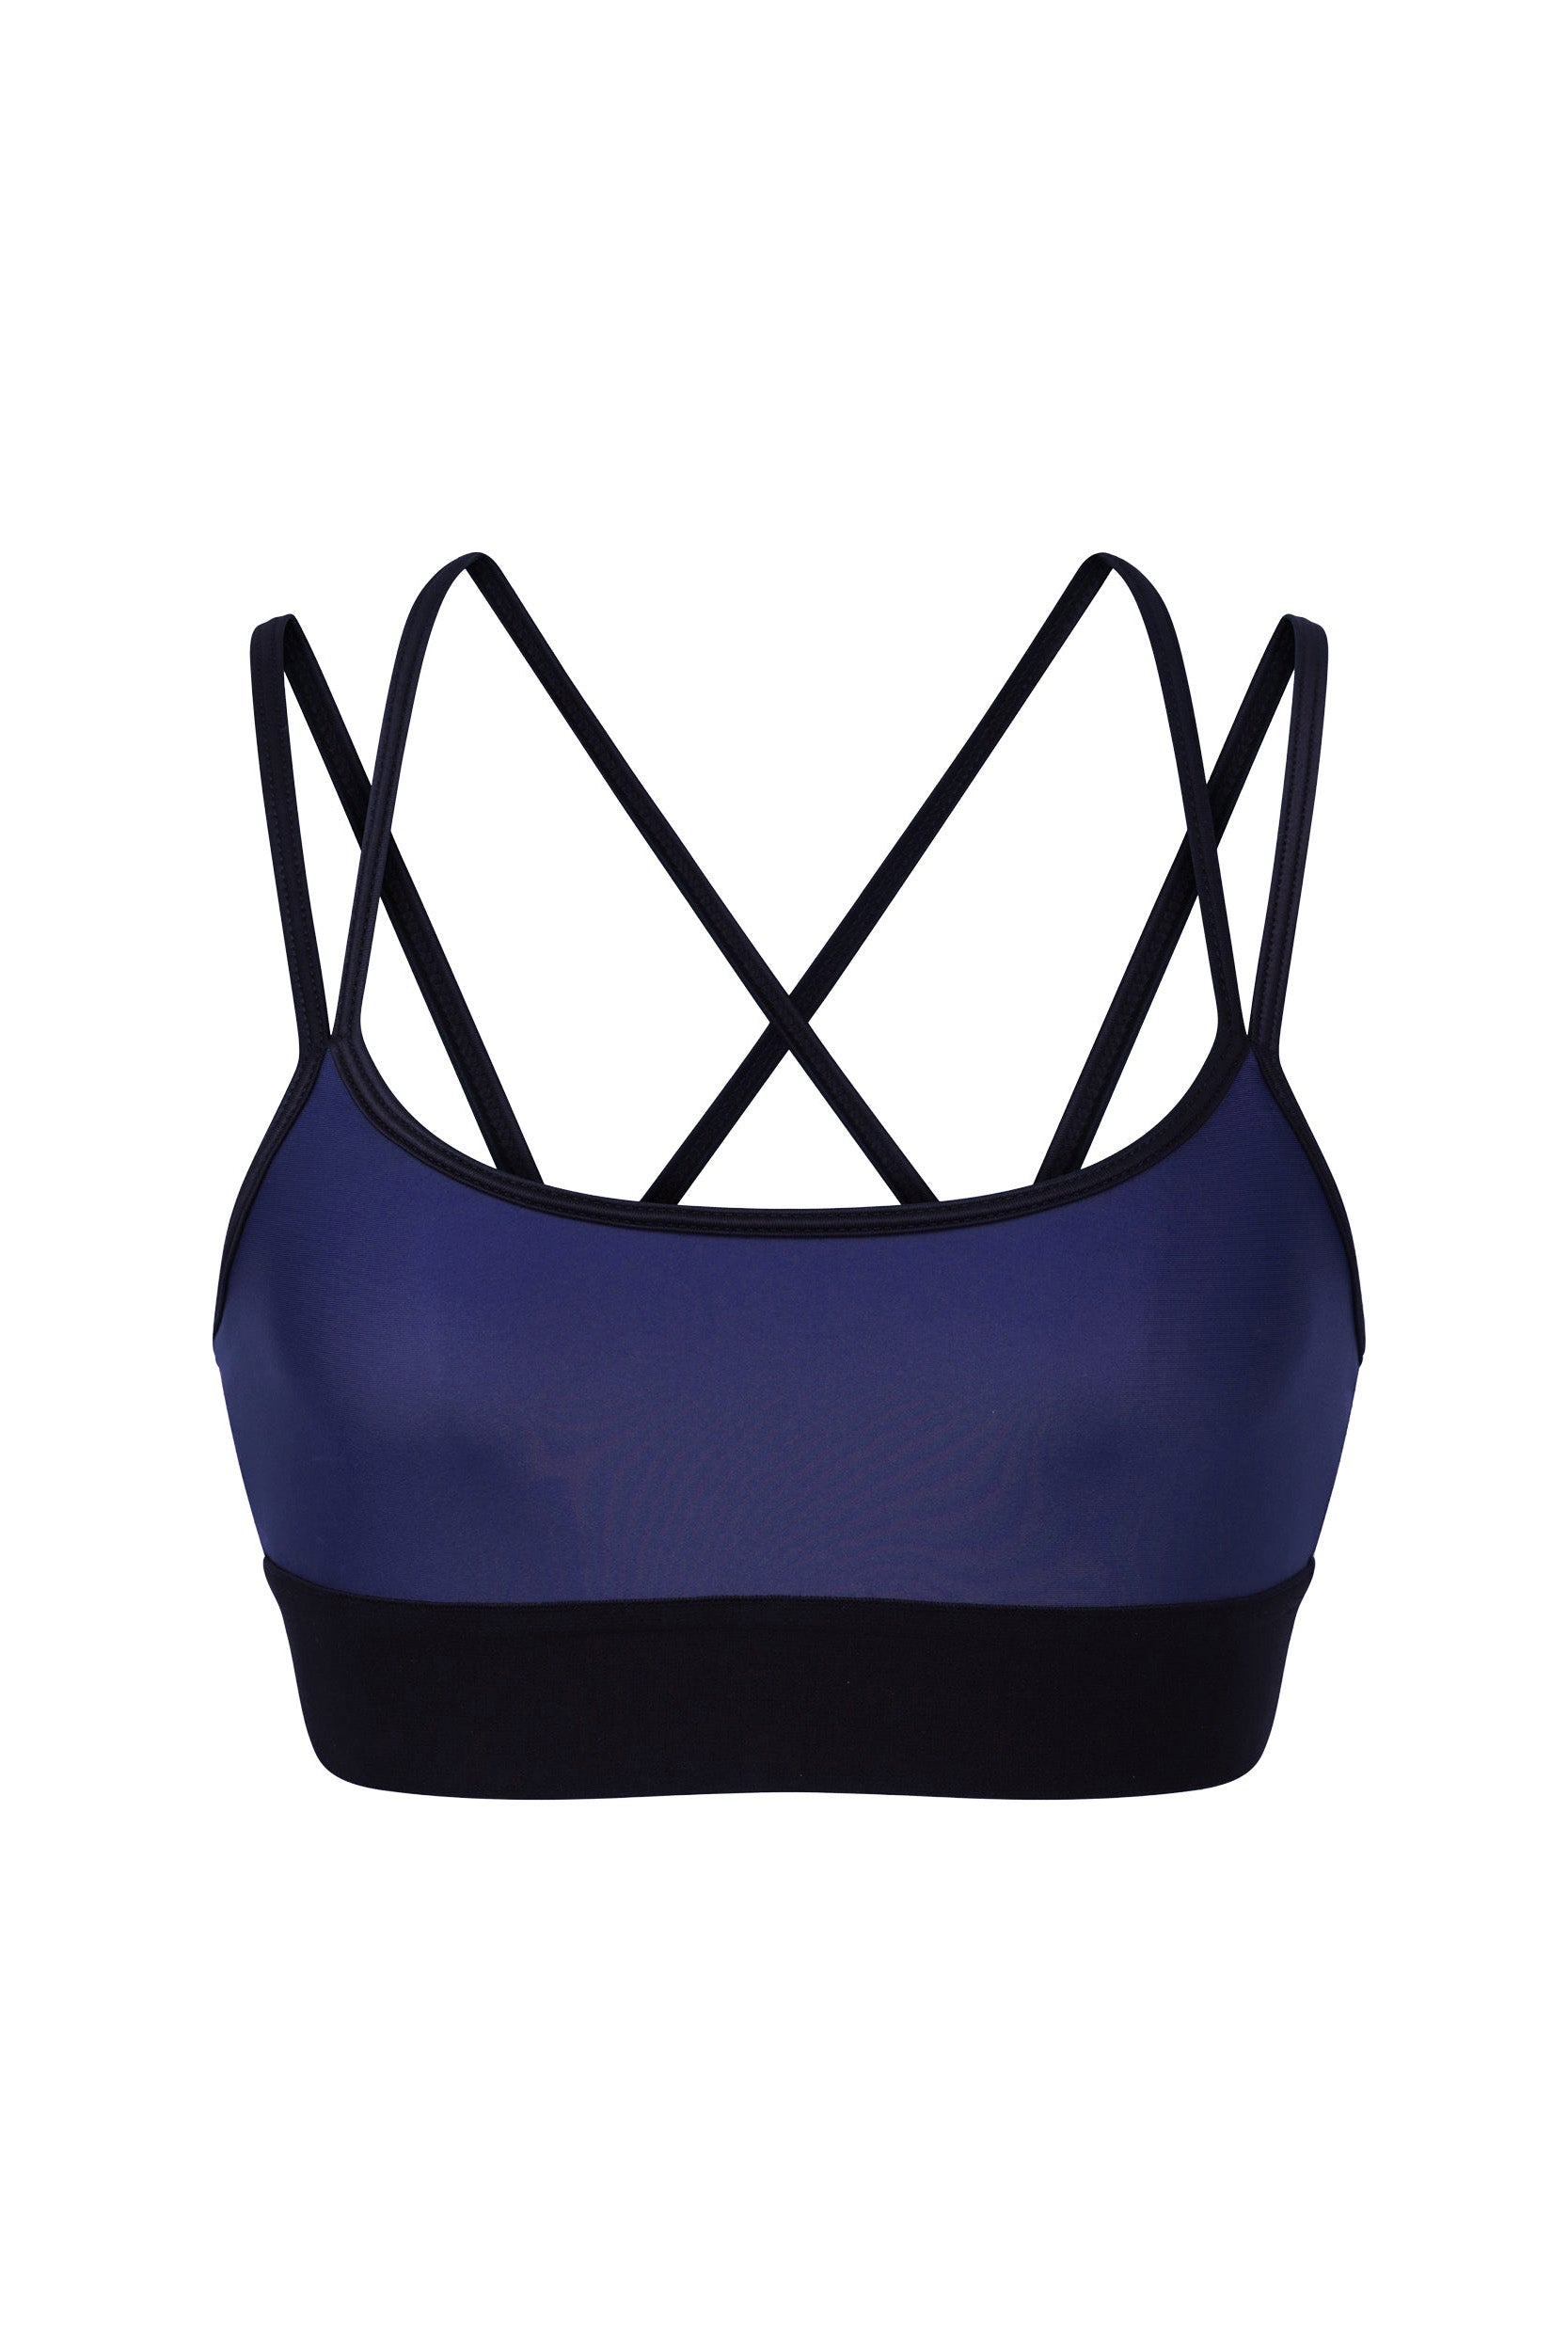 Introducing the Liquid Jolie Bra - Navy: a navy blue sports bra adorned with black trim and crisscrossing straps at the back. Crafted from liquid fabric, it provides moisture-wicking properties and features a broad black band for enhanced support, ensuring a sleek and stylish appearance.